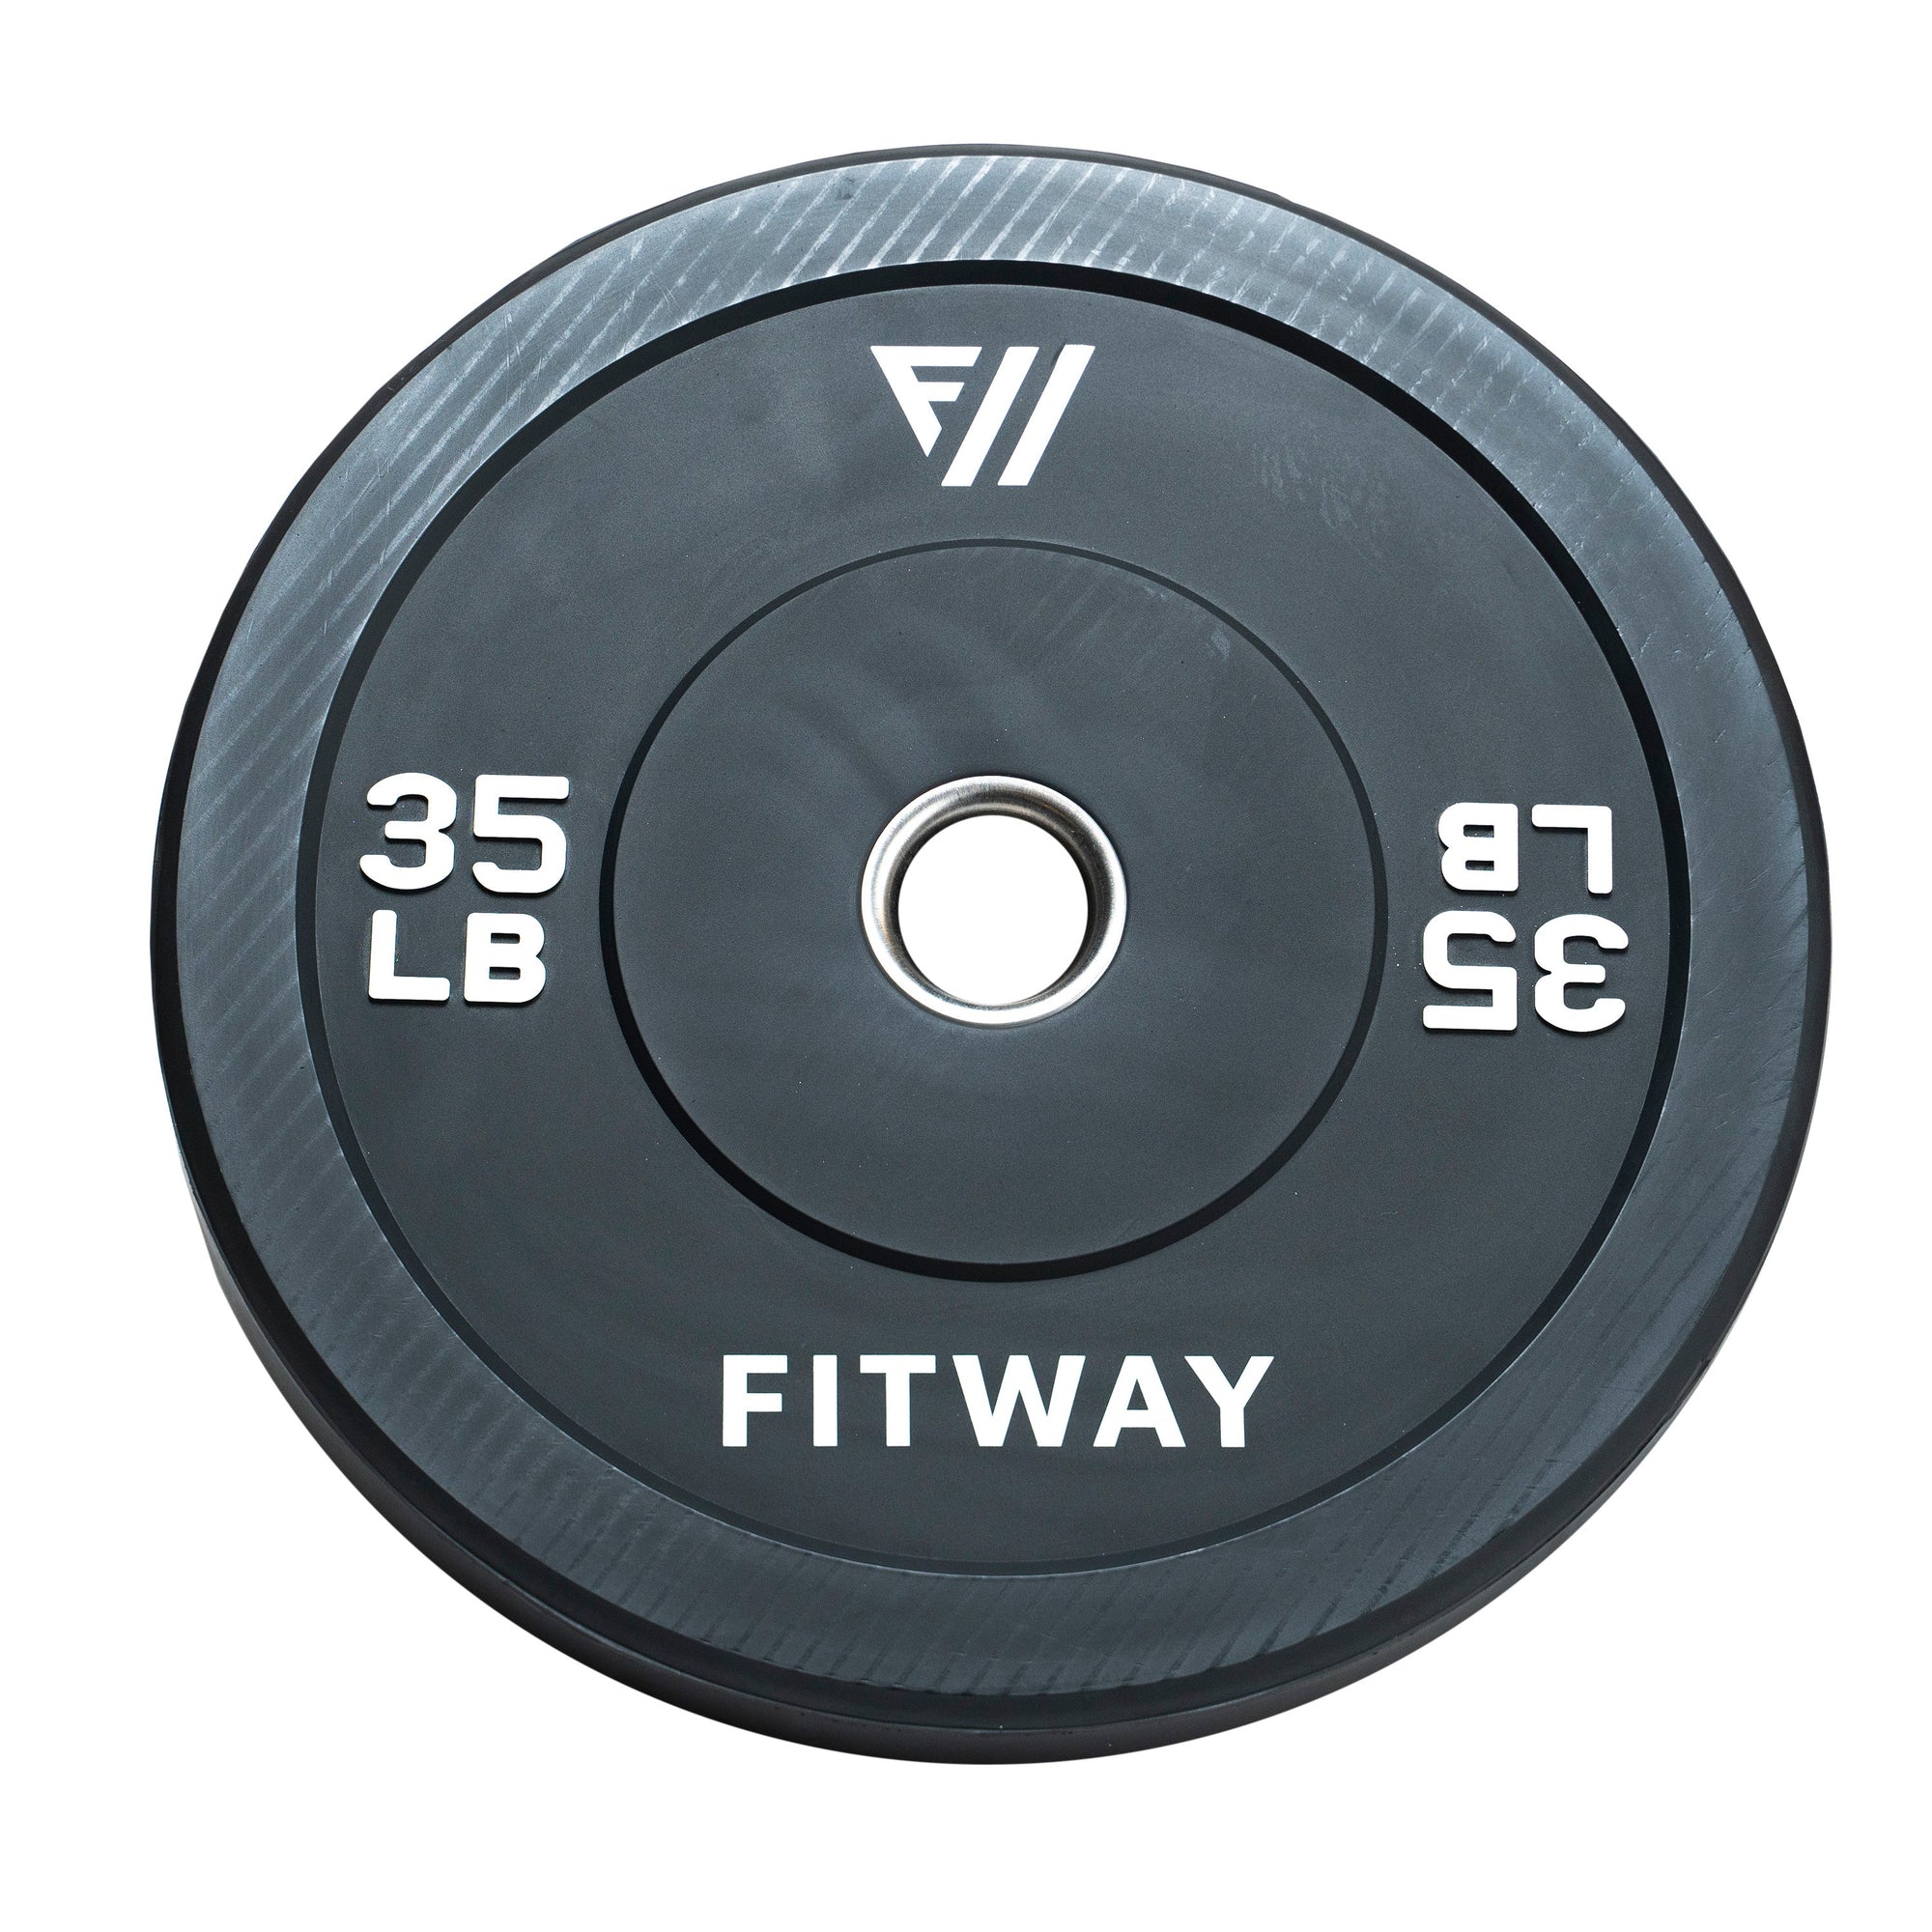 FitWay Equip. 35lb Olympic Rubber Bumper Plate